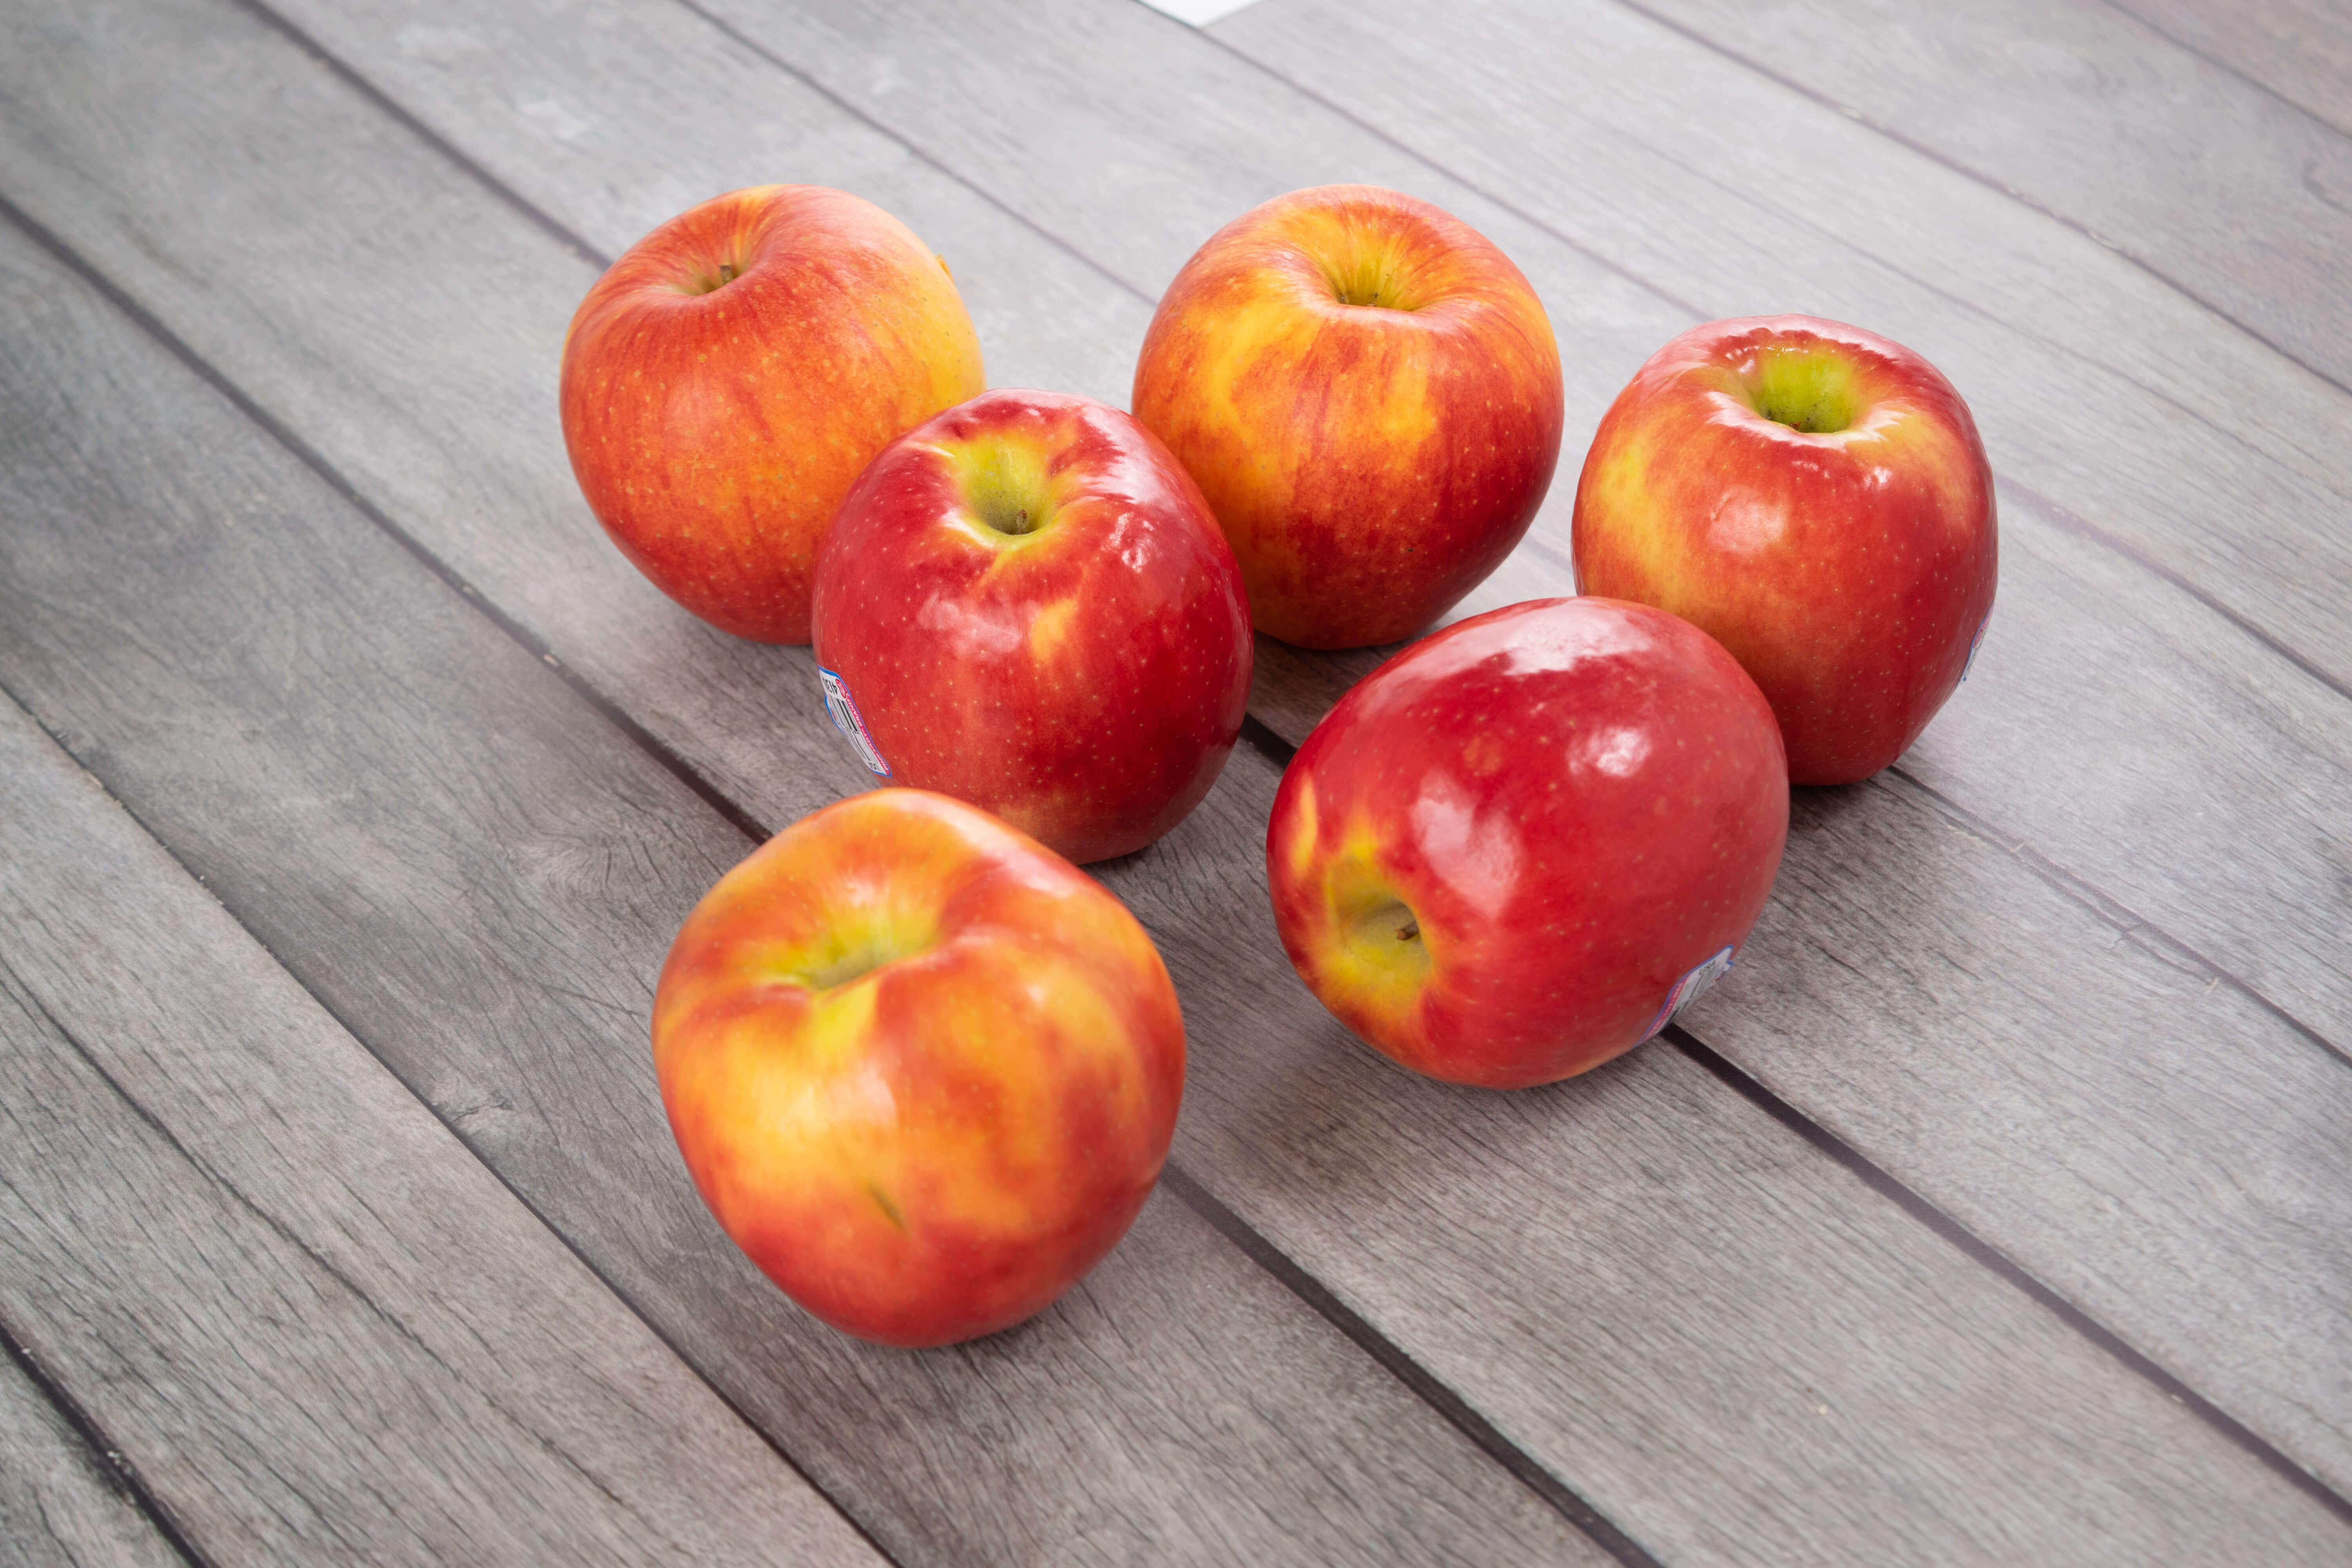 apples are a great fruit for workout snacks